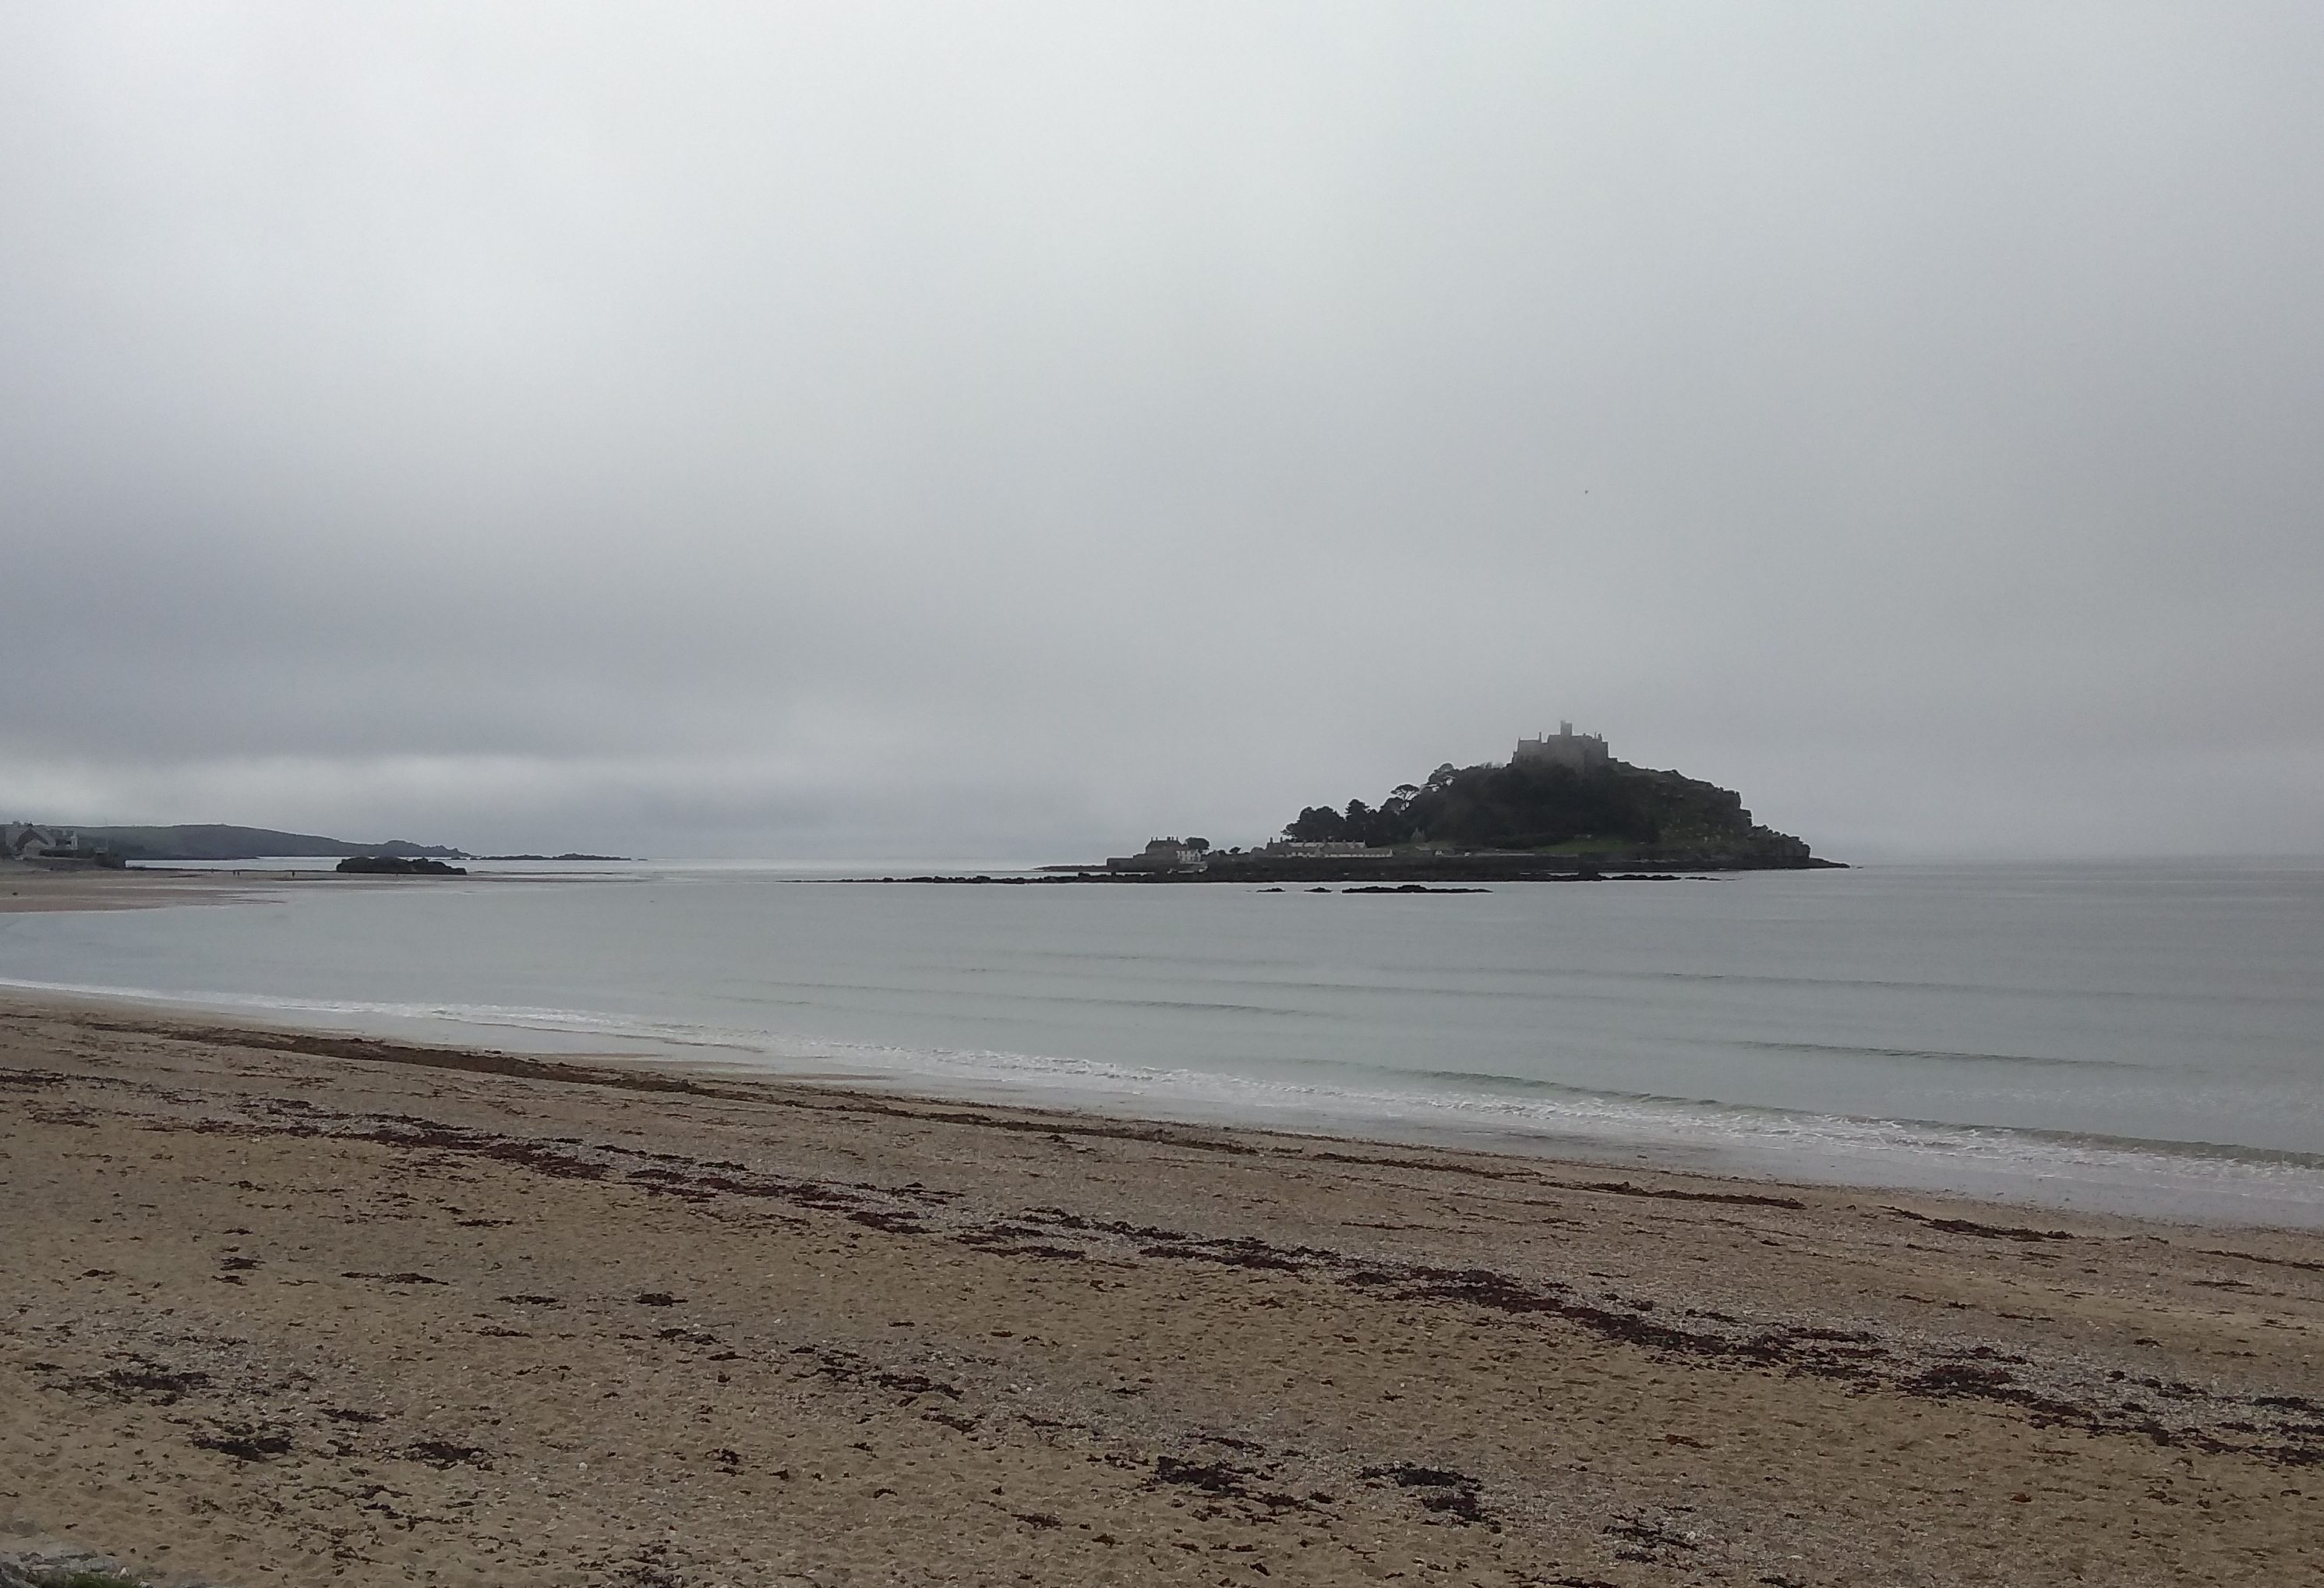 St. Micheal's Mount from the beach at Penzance